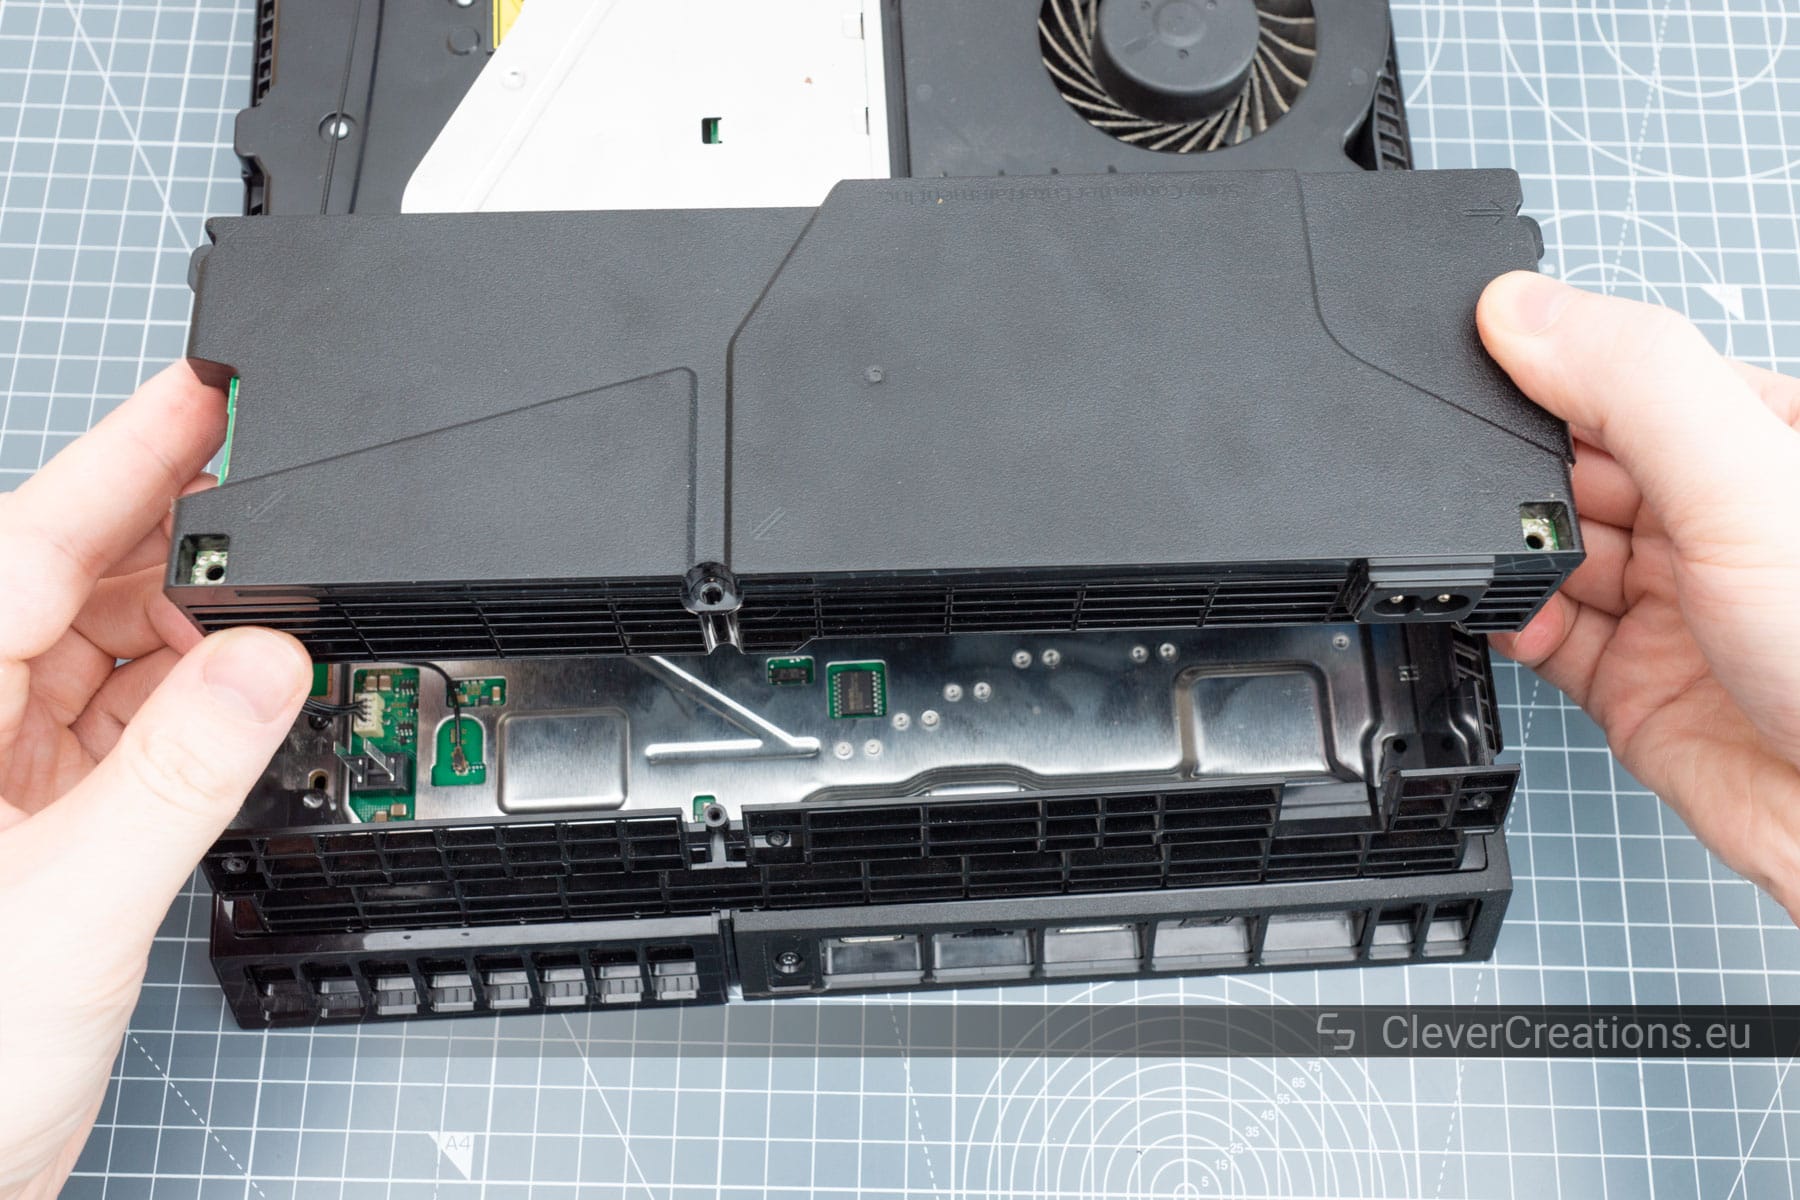 A hand pulling a HDD mount out of a Playstation.